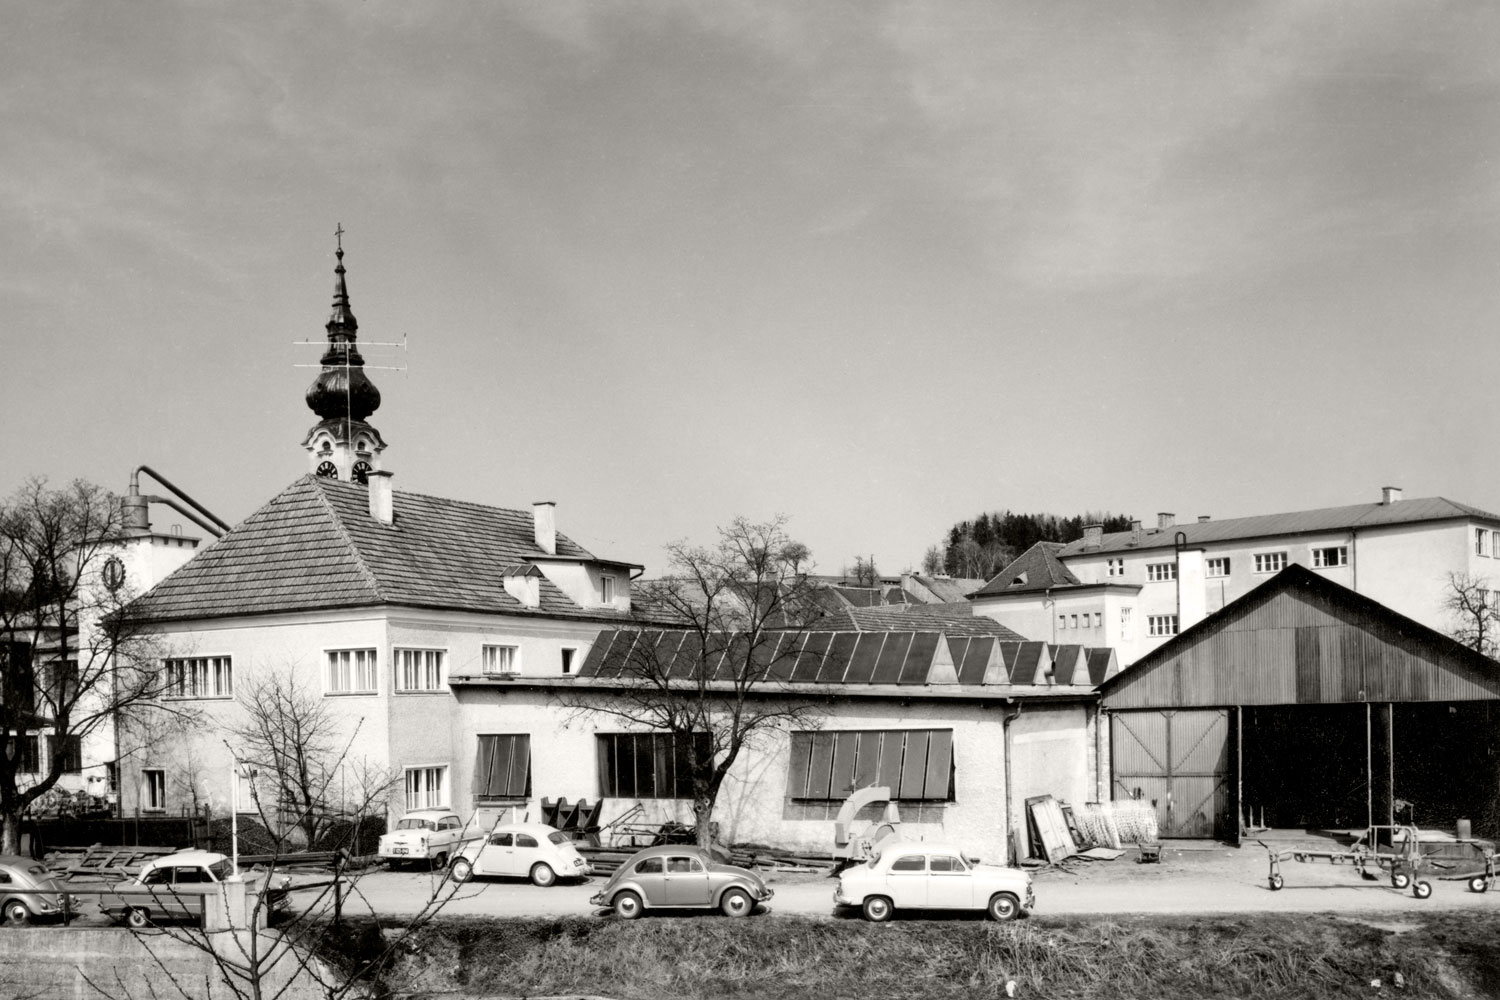 A part of Grieskirchen’s town centre: PÖTTINGER Plant I around 1960. The VW Beetle is clearly popular among PÖTTINGER employees.